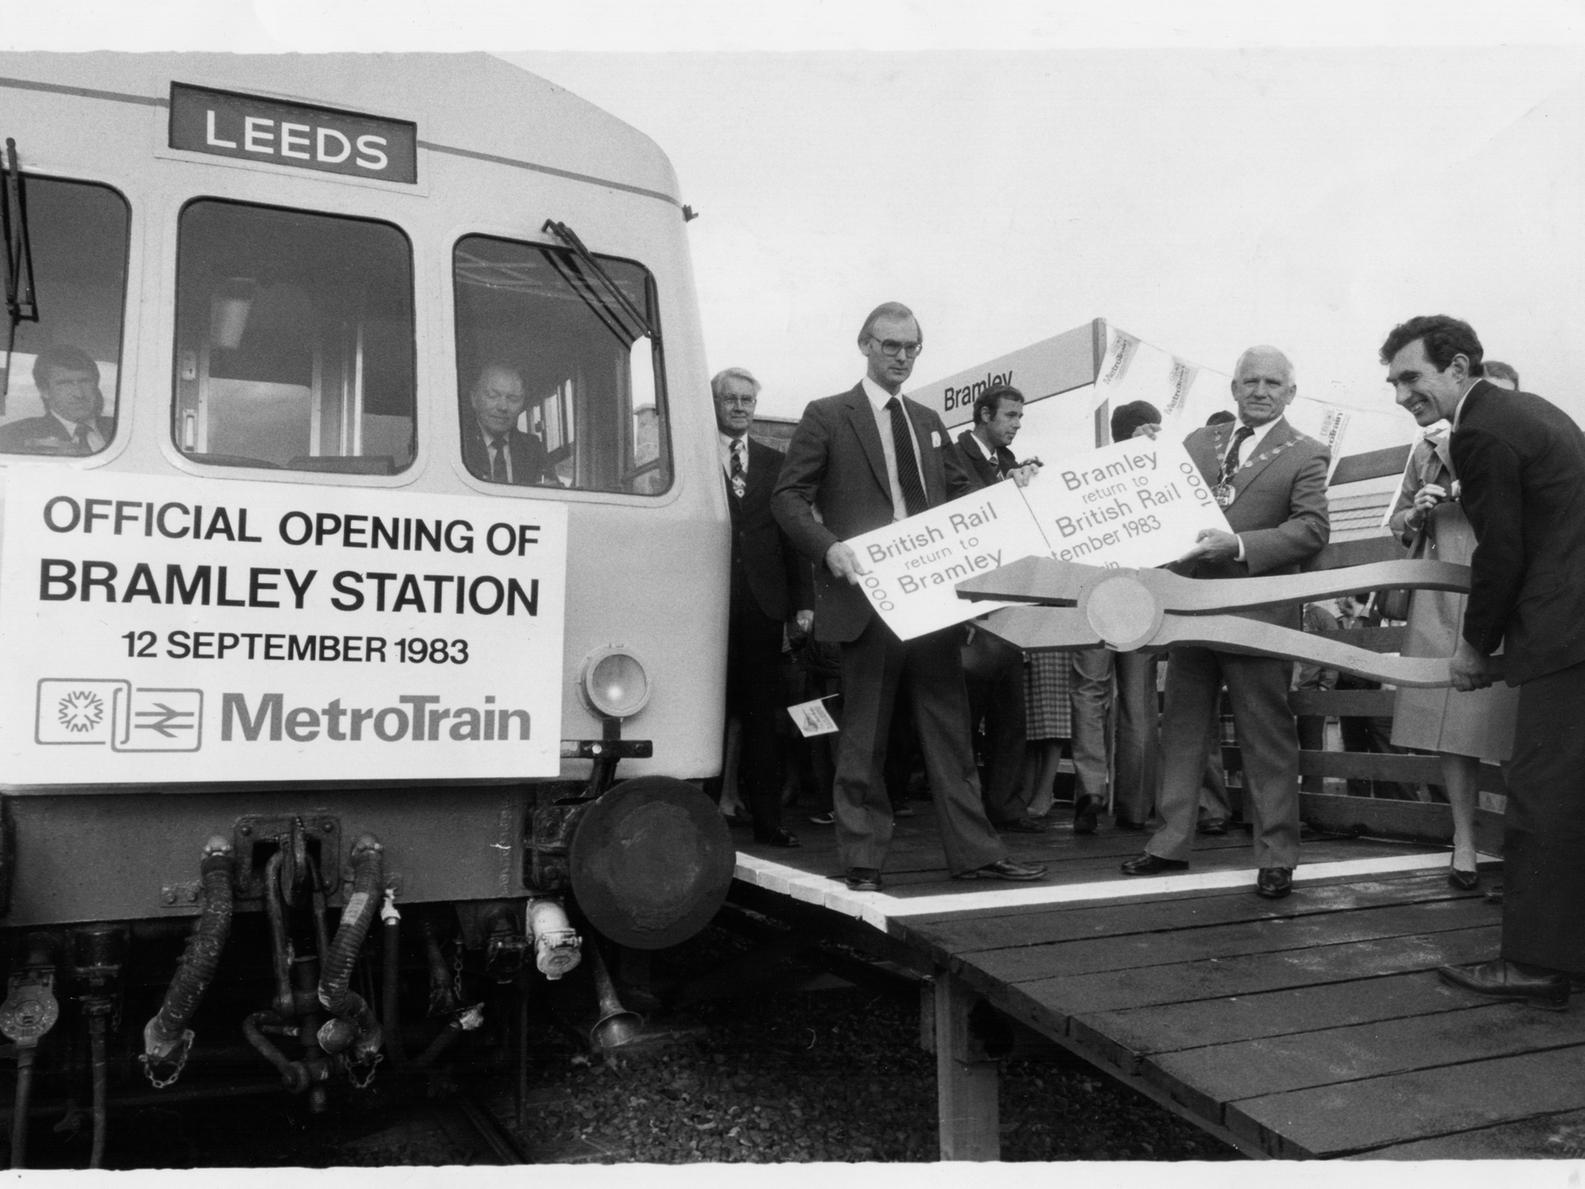 Bramley station was officially opened to the public.